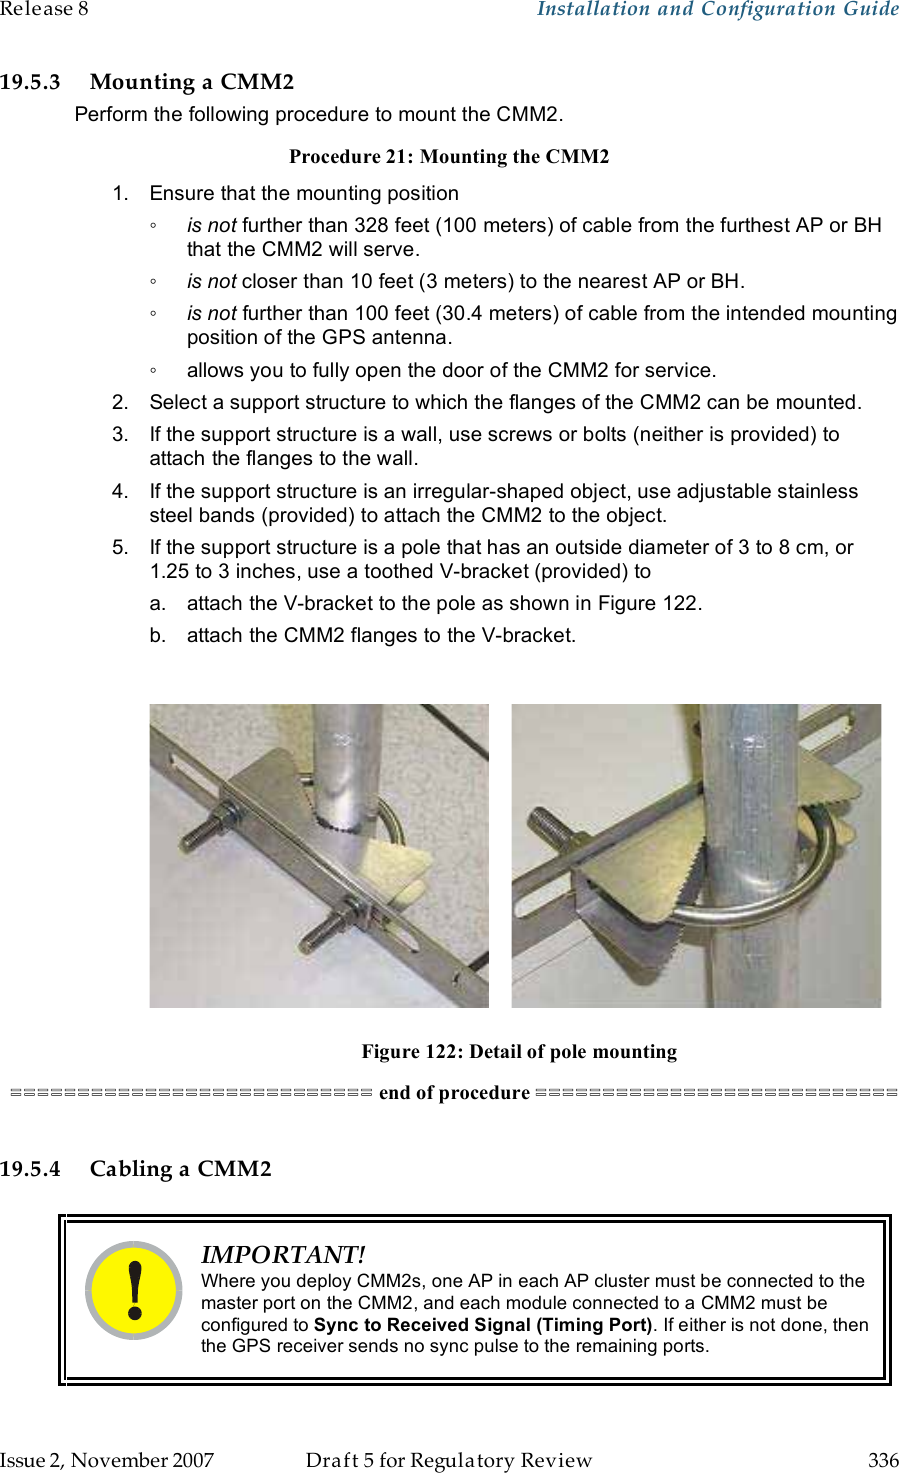 Release 8    Installation and Configuration Guide   Issue 2, November 2007  Draft 5 for Regulatory Review  336     19.5.3 Mounting a CMM2 Perform the following procedure to mount the CMM2. Procedure 21: Mounting the CMM2 1.  Ensure that the mounting position ◦ is not further than 328 feet (100 meters) of cable from the furthest AP or BH that the CMM2 will serve. ◦ is not closer than 10 feet (3 meters) to the nearest AP or BH. ◦ is not further than 100 feet (30.4 meters) of cable from the intended mounting position of the GPS antenna. ◦  allows you to fully open the door of the CMM2 for service. 2.  Select a support structure to which the flanges of the CMM2 can be mounted. 3.  If the support structure is a wall, use screws or bolts (neither is provided) to attach the flanges to the wall. 4.  If the support structure is an irregular-shaped object, use adjustable stainless steel bands (provided) to attach the CMM2 to the object. 5.  If the support structure is a pole that has an outside diameter of 3 to 8 cm, or 1.25 to 3 inches, use a toothed V-bracket (provided) to a.  attach the V-bracket to the pole as shown in Figure 122. b.  attach the CMM2 flanges to the V-bracket.                               Figure 122: Detail of pole mounting =========================== end of procedure ===========================  19.5.4 Cabling a CMM2   IMPORTANT! Where you deploy CMM2s, one AP in each AP cluster must be connected to the master port on the CMM2, and each module connected to a CMM2 must be configured to Sync to Received Signal (Timing Port). If either is not done, then the GPS receiver sends no sync pulse to the remaining ports.  